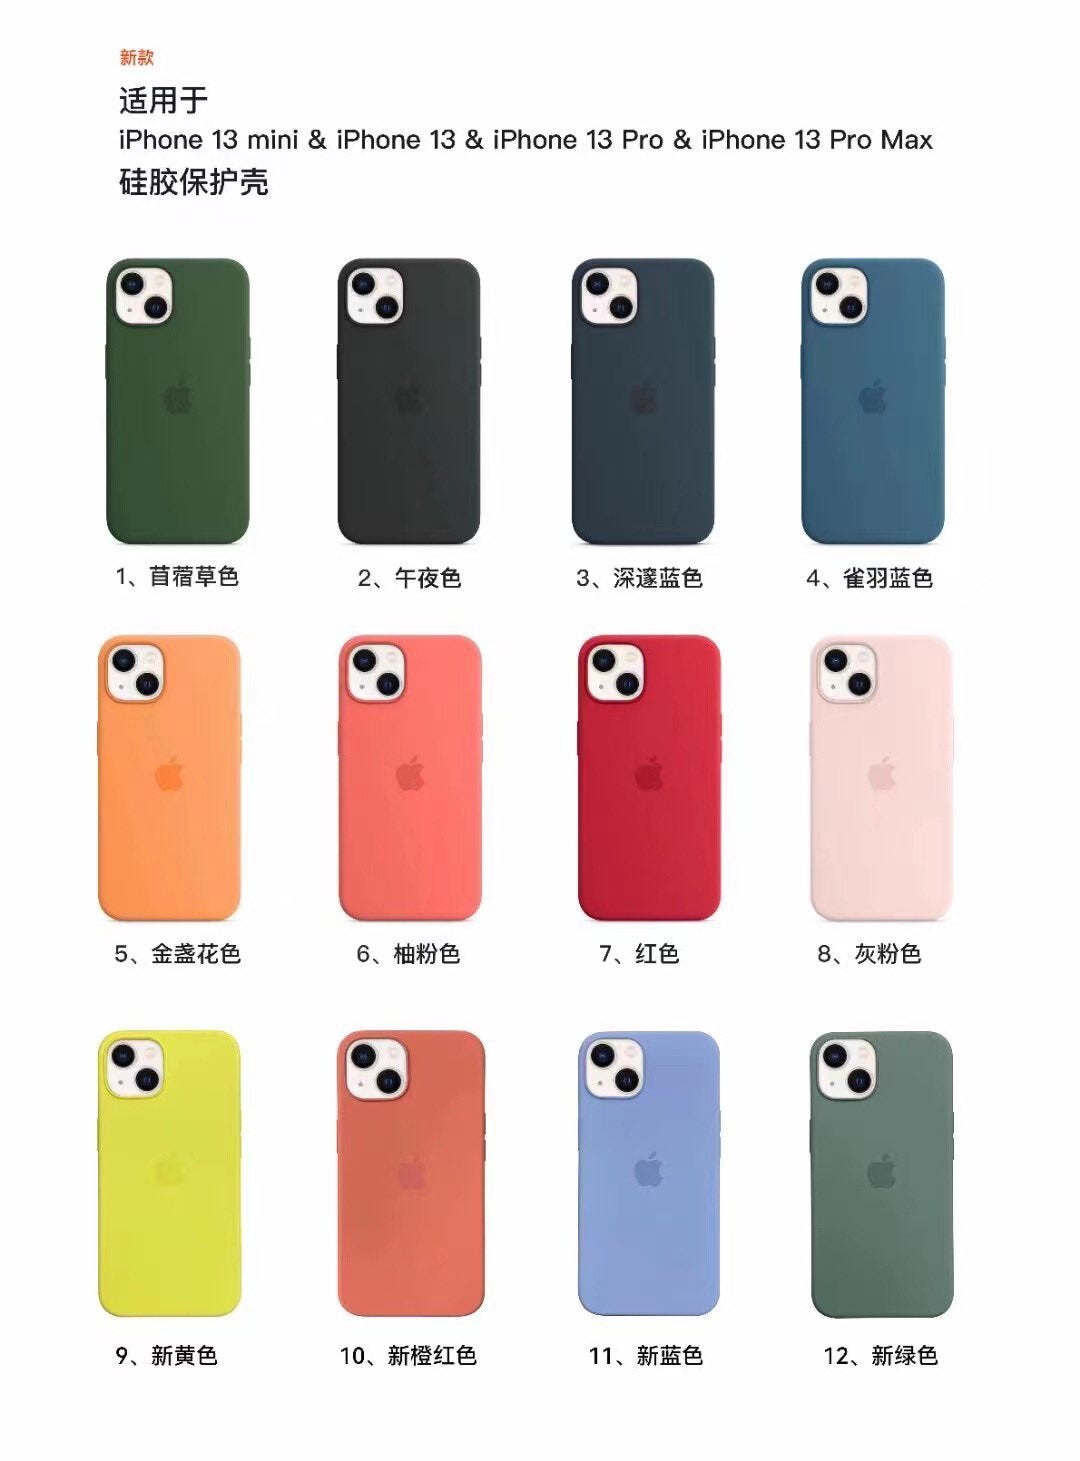 The last row here reflects the new additions to the iPhone 13 MagSafe silicone cases line - Leaked images of four new iPhone 13 MagSafe cases appear online